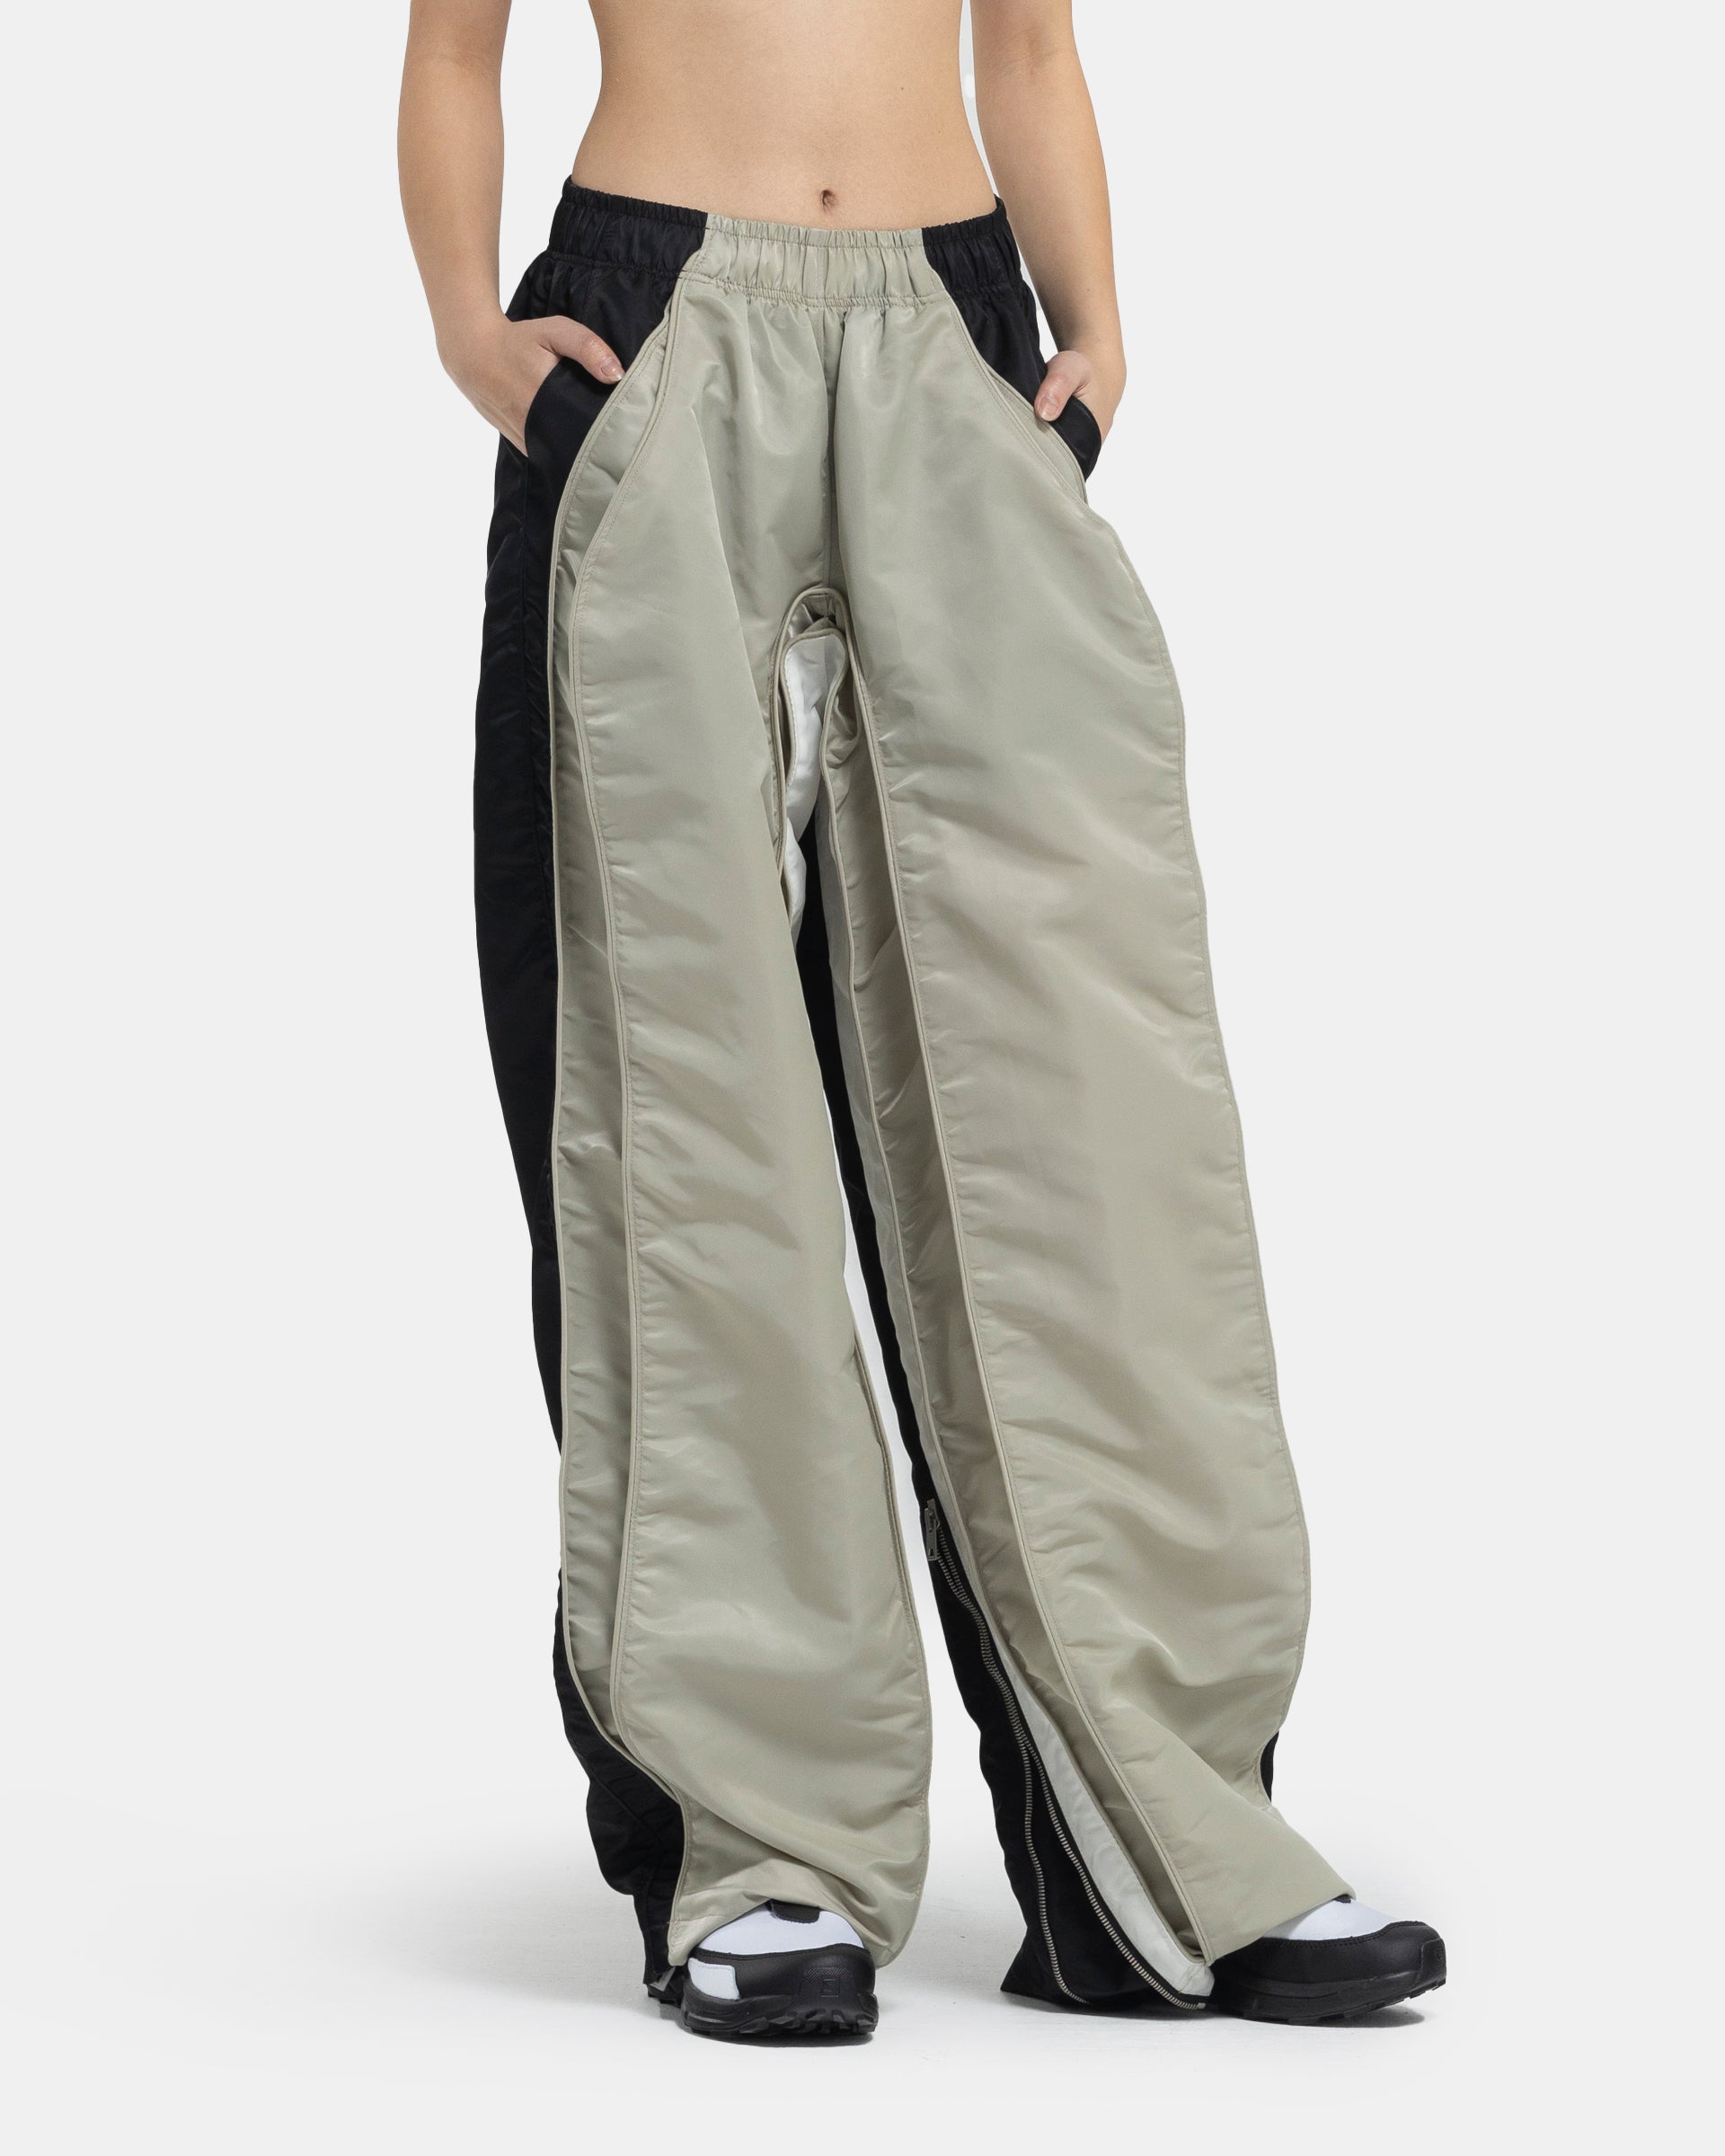 Colorblocked Nylon Pants in Off-White and Black